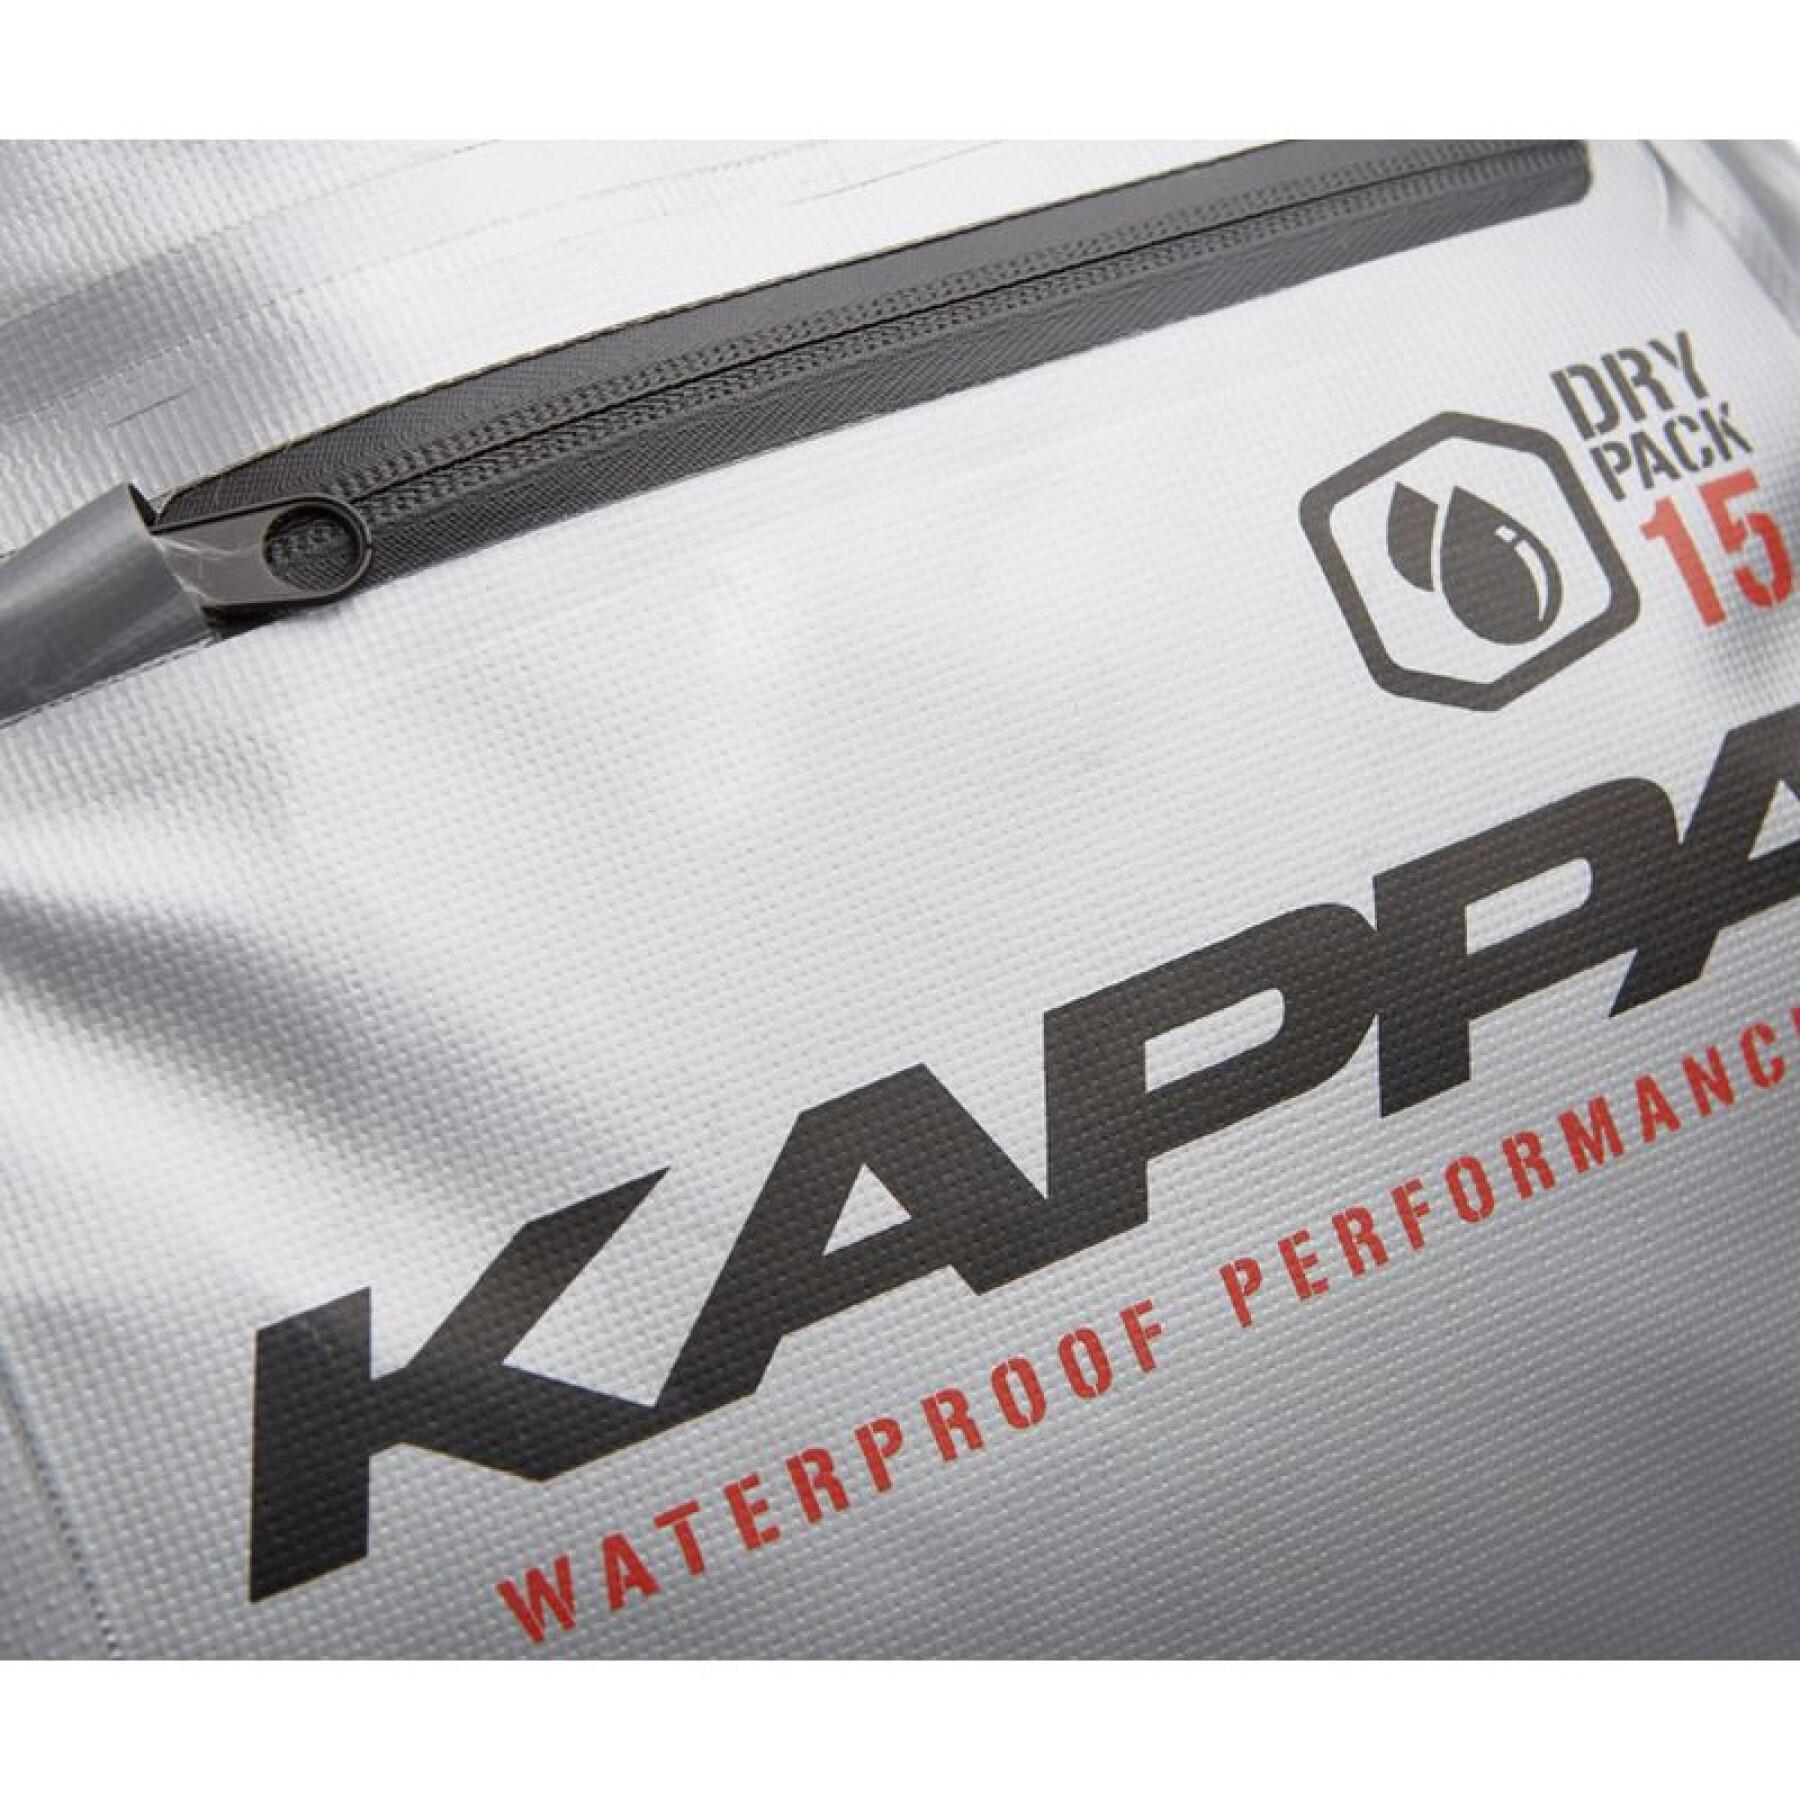 Waterproof tunnel bag for scooter Kappa WA407S DRY PACK